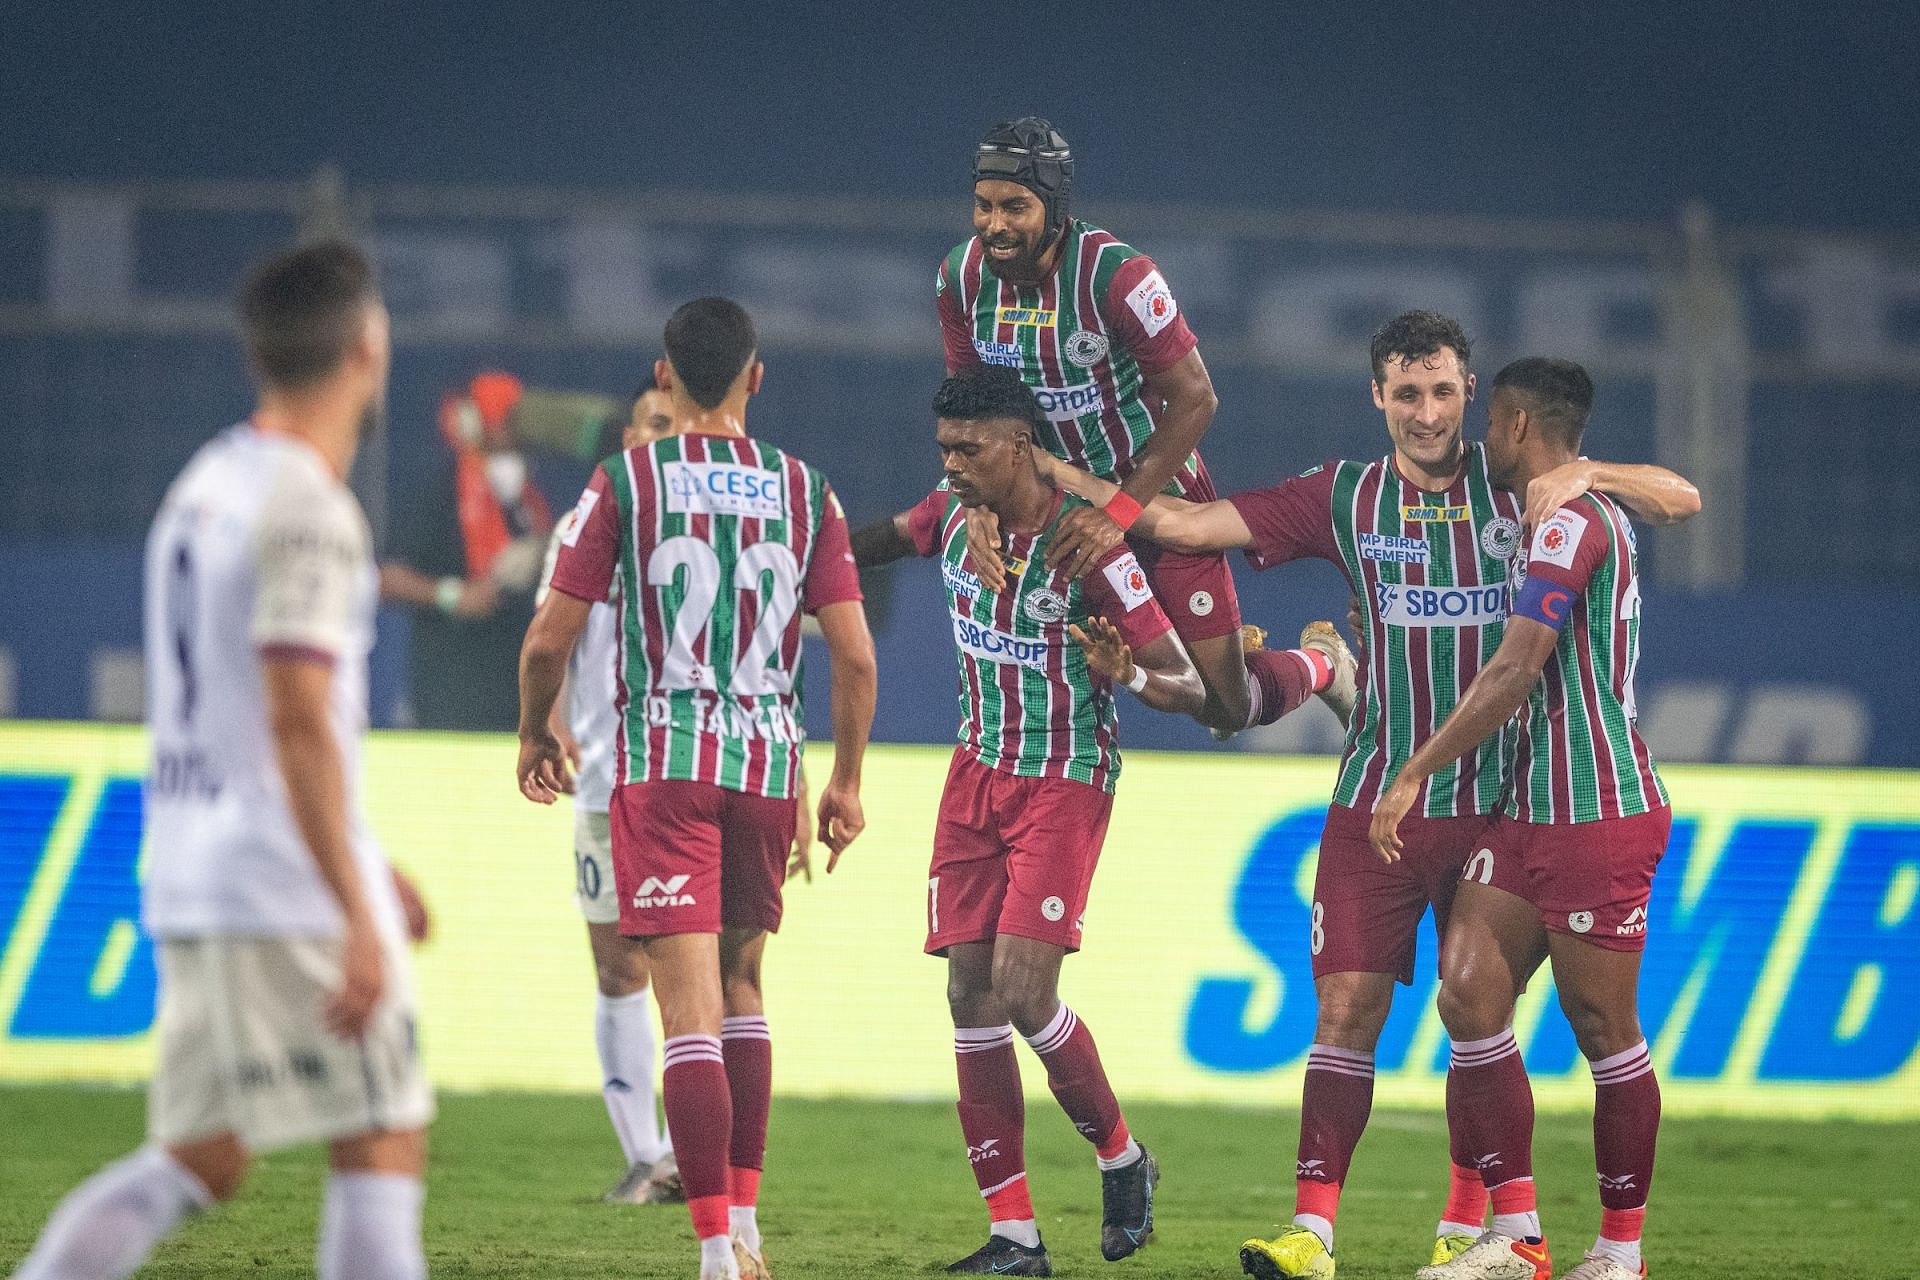 ATK Mohun Bagan players celebrate a goal against the Gaurs (Image Courtesy: ISL)